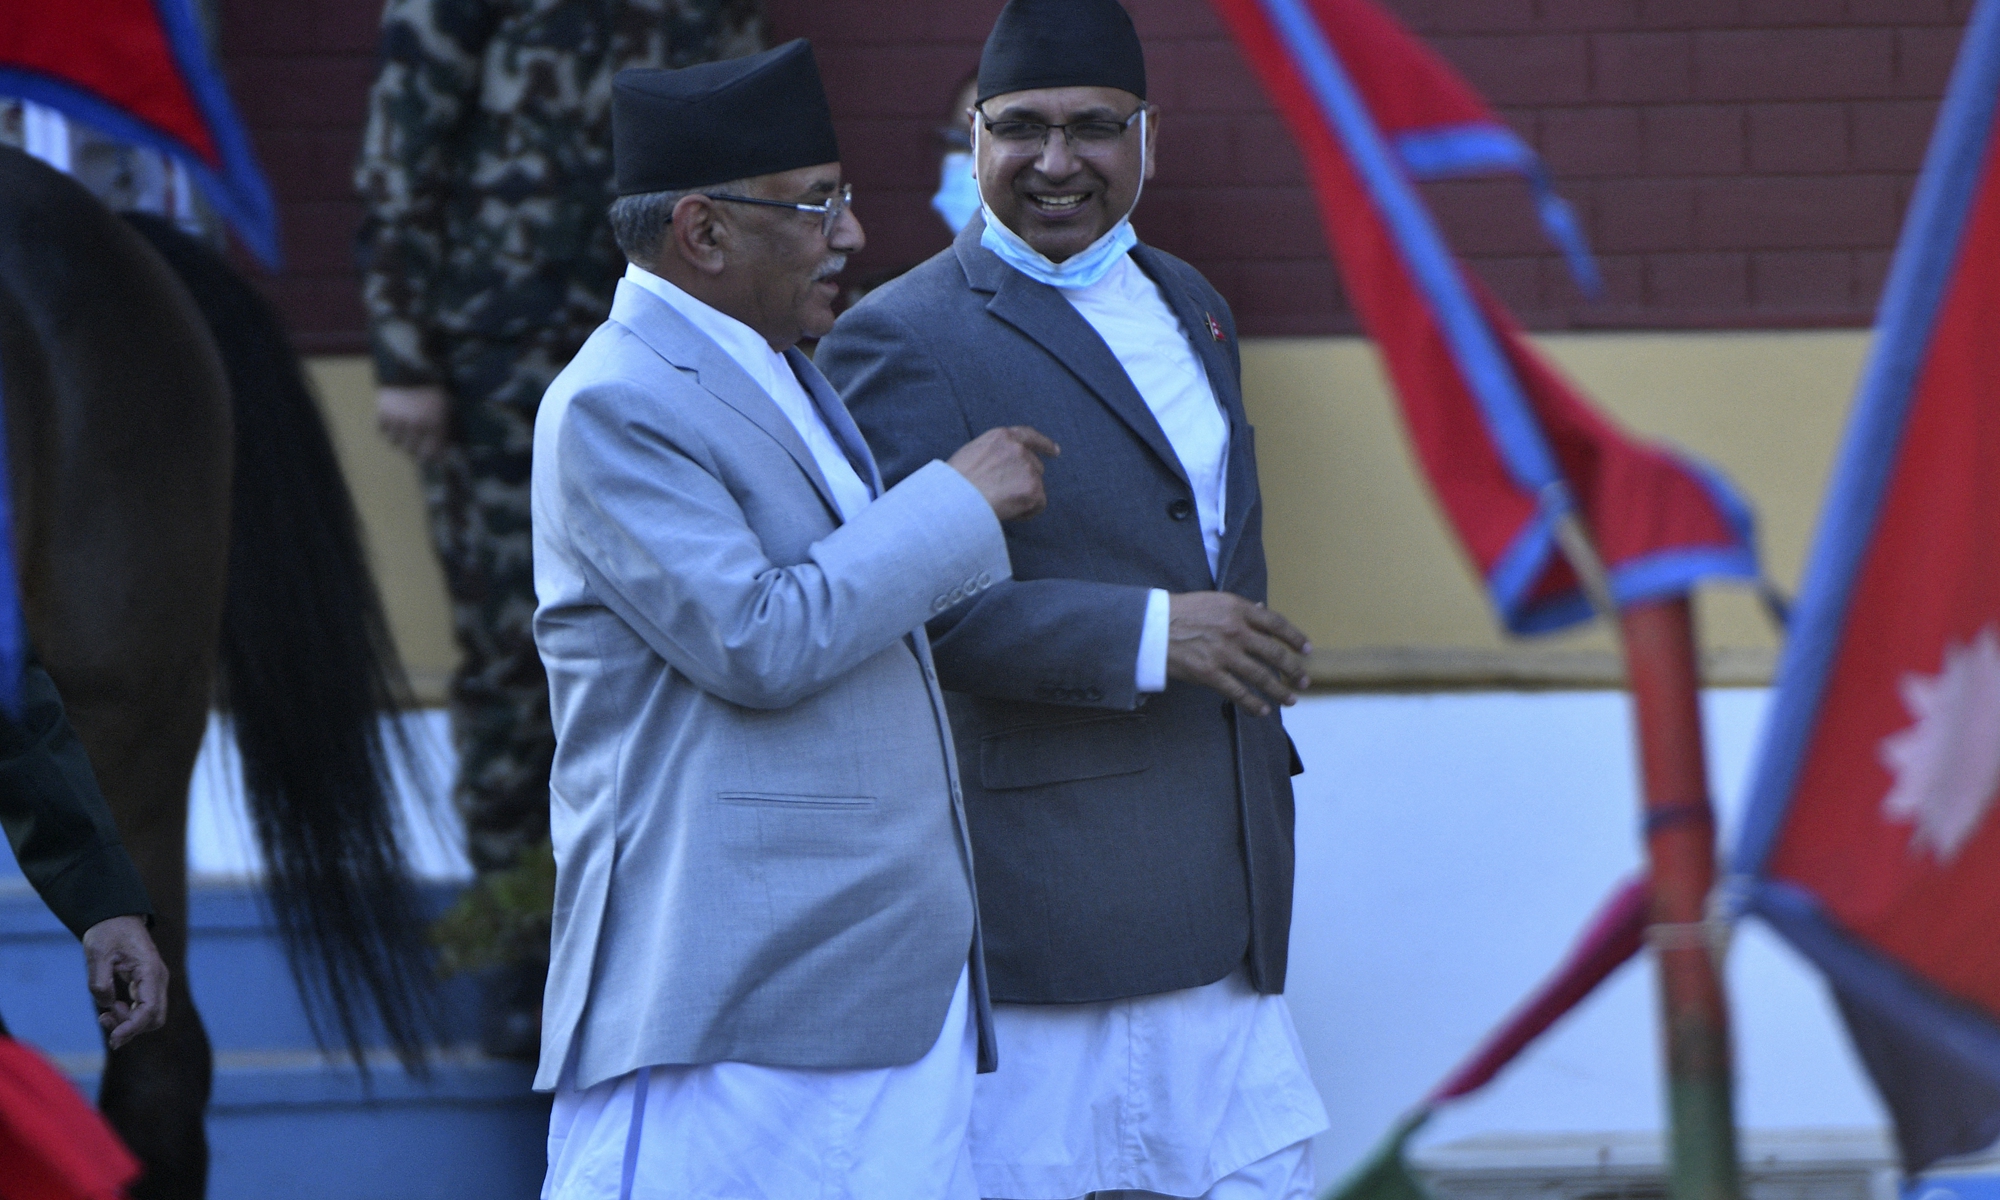 Nepal's newly elected Prime Minister Pushpa Kamal Dahal (left) arrives to attend his swearing-in ceremony at the President's House in Kathmandu on December 26, 2022 (See story on Page 3). Photo: AFP